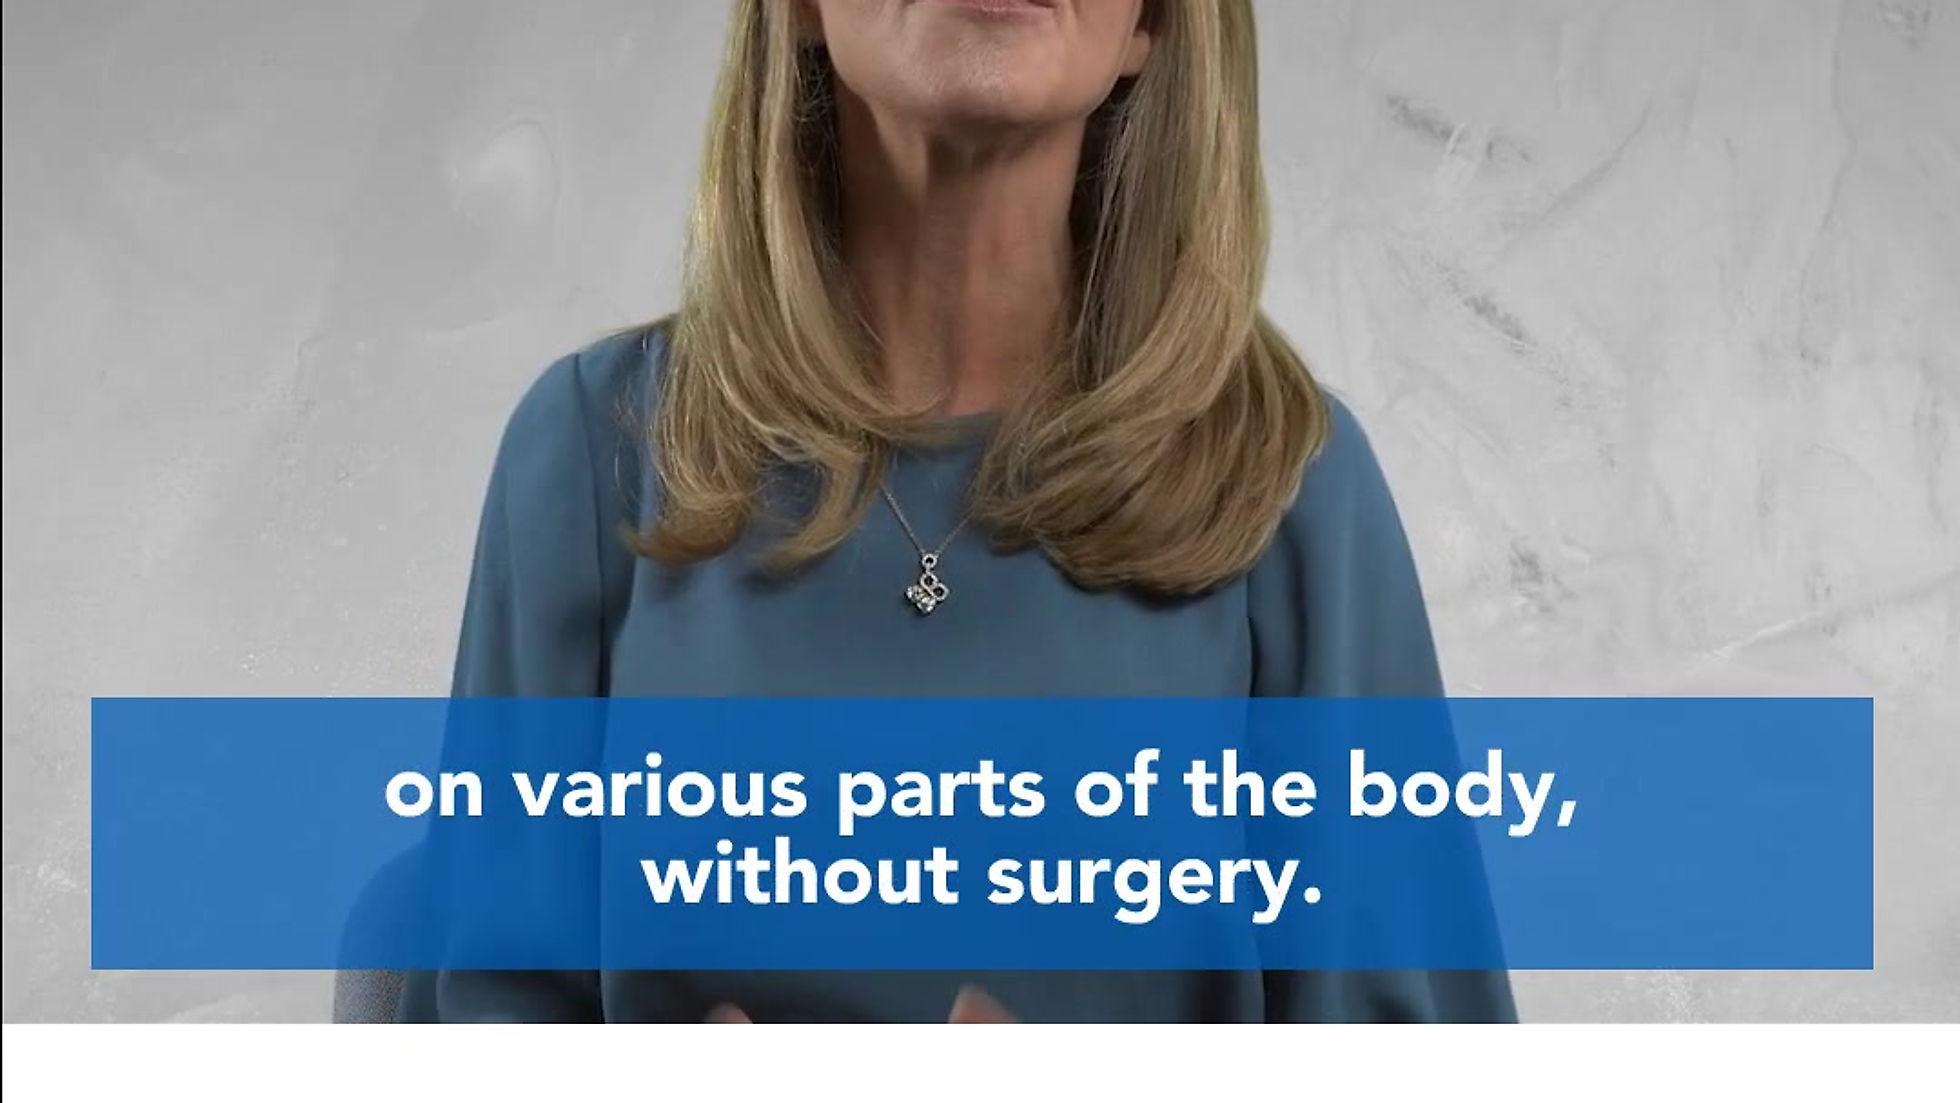 Q1+-+what+is+CoolSculpting